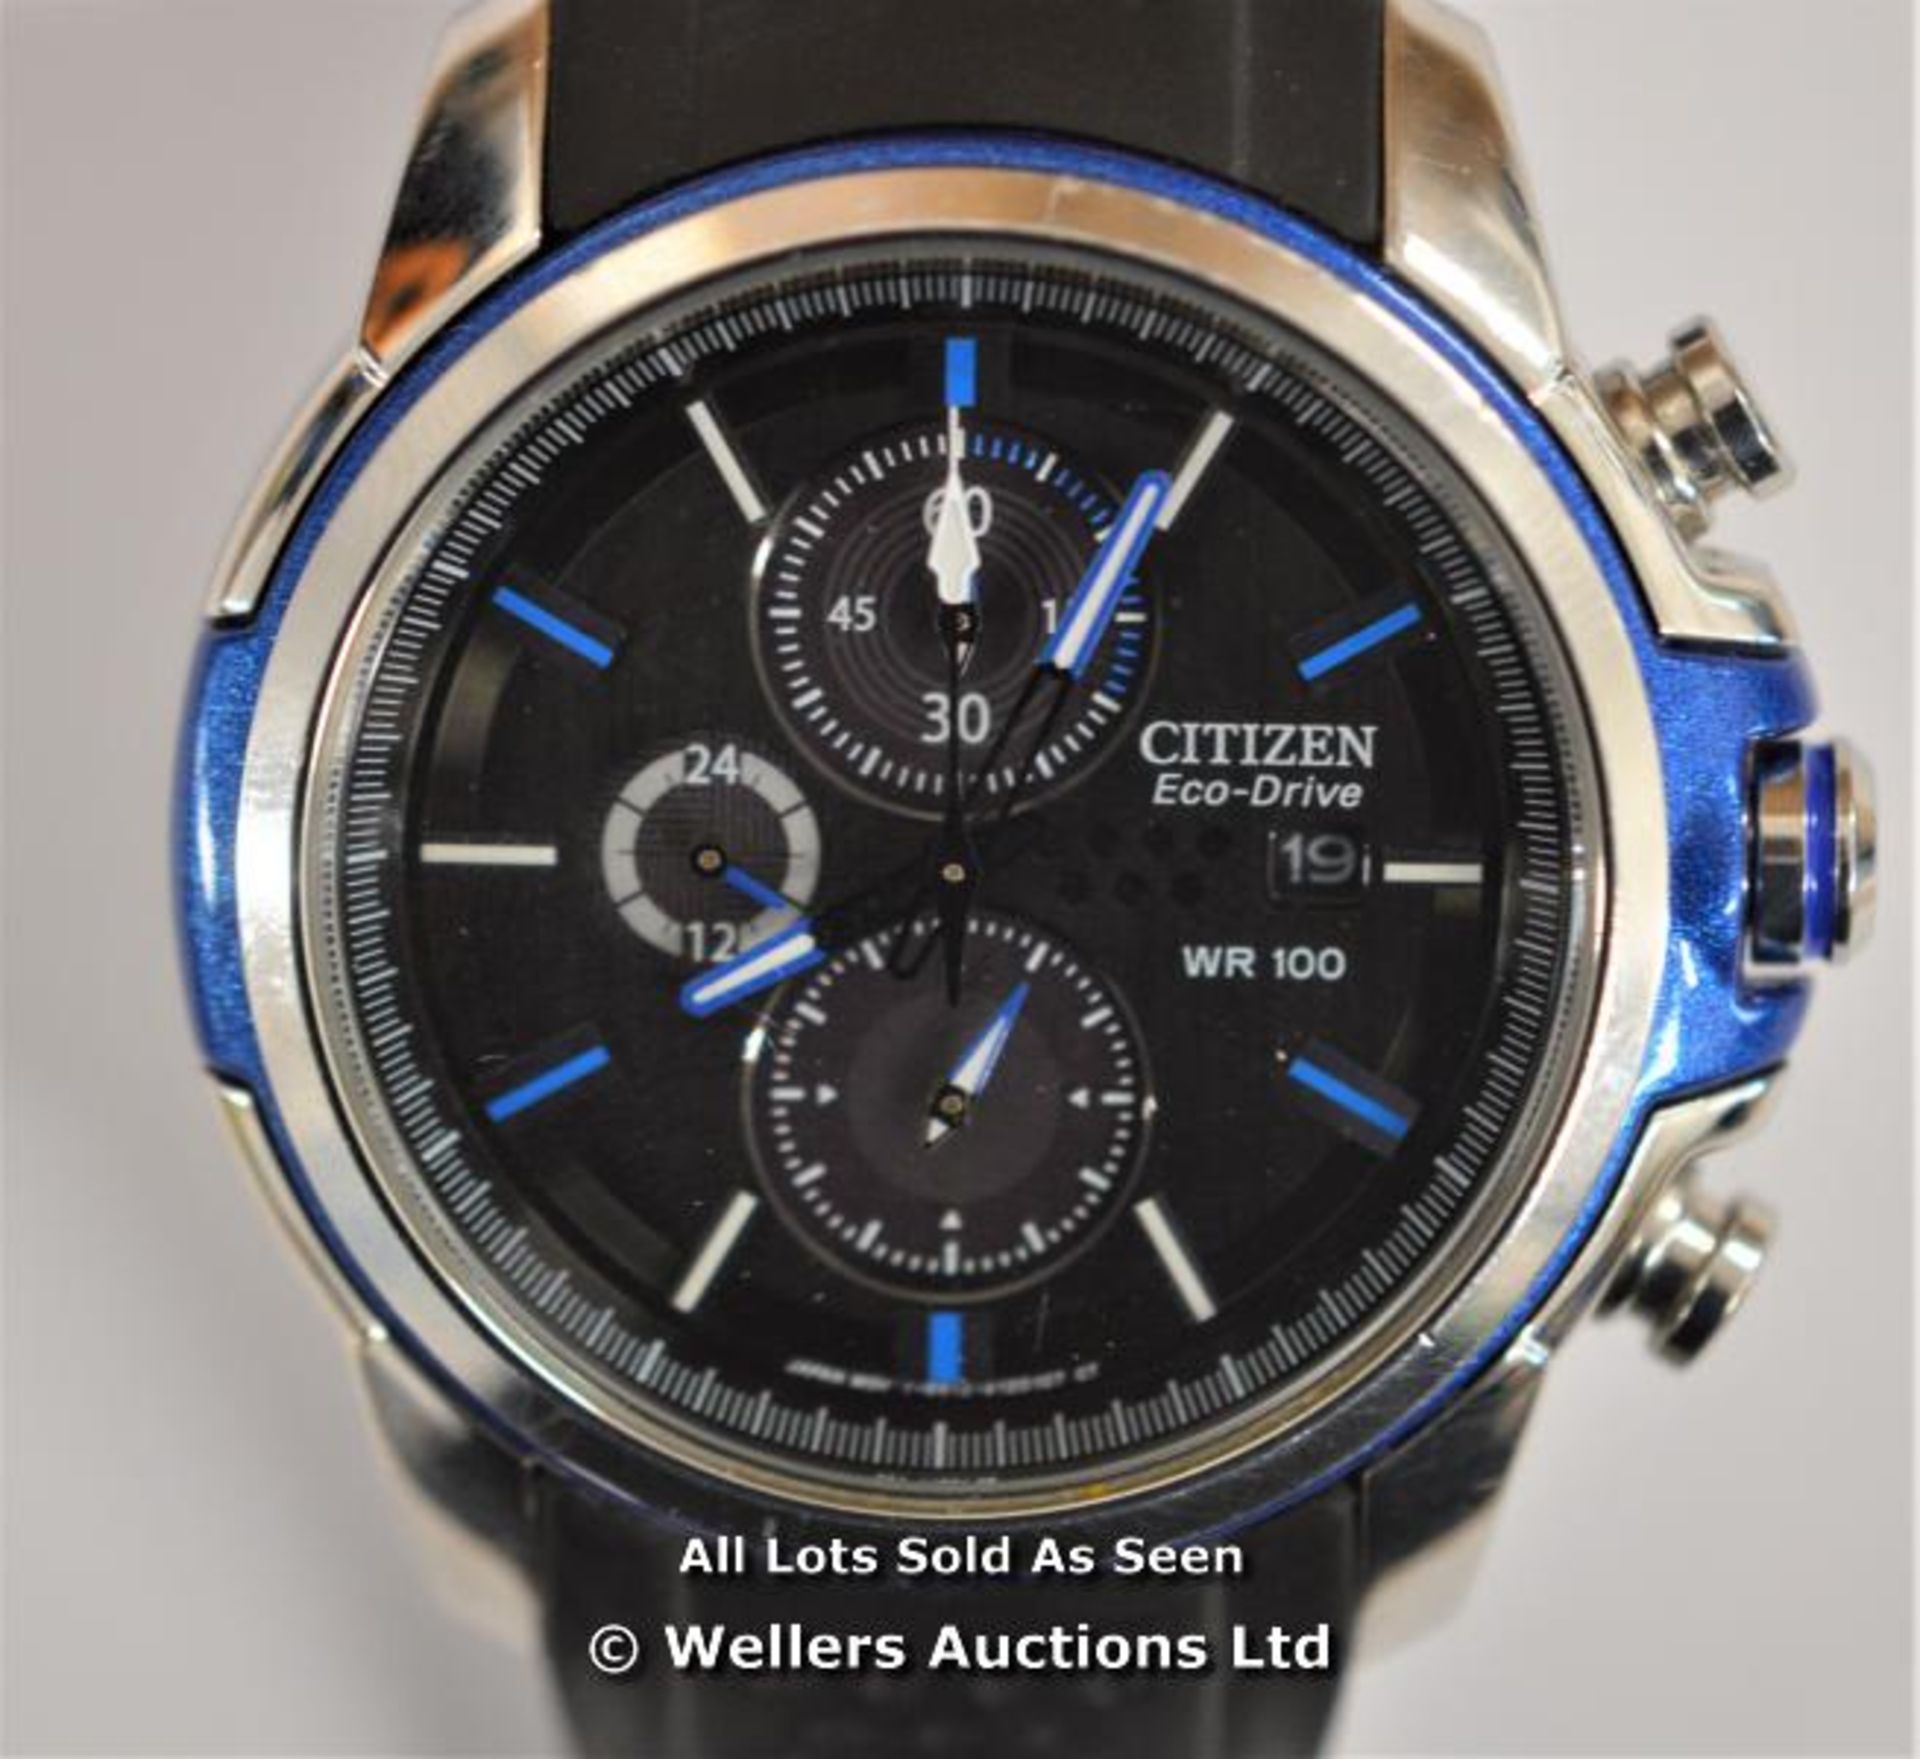 *GENTS CITIZEN ECO-DRIVE CHRONOGRAPH, QUARTZ MOVEMENT, BLACK BATTON DIAL WITH DATE IN STAINLESS - Image 3 of 5